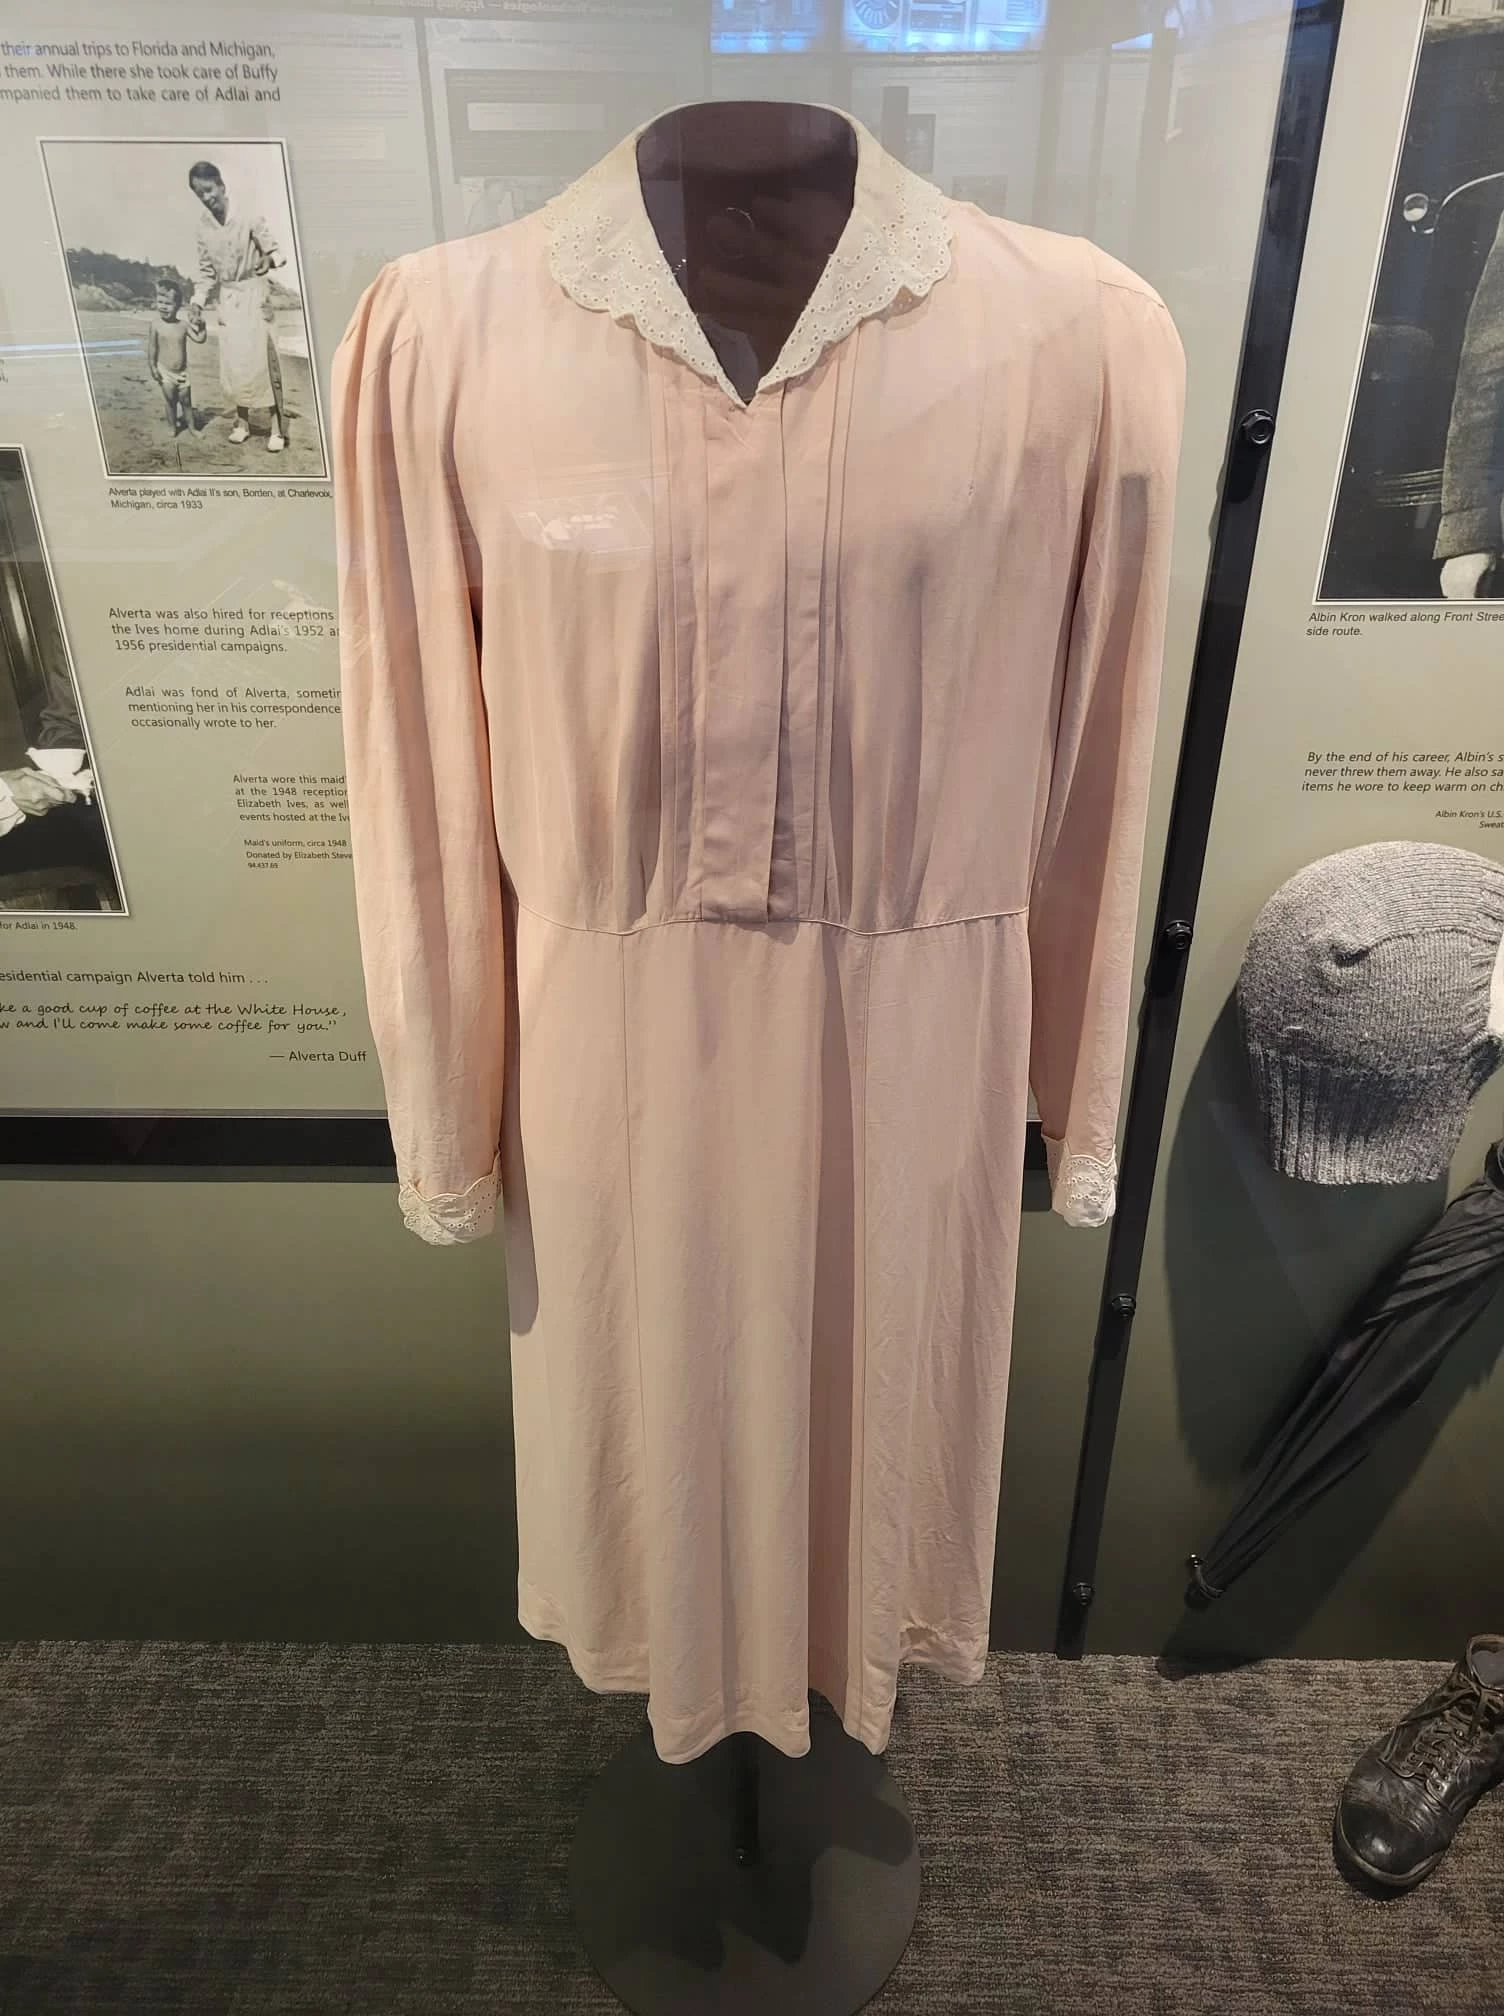 a long-sleeved light pink dress with white collar.